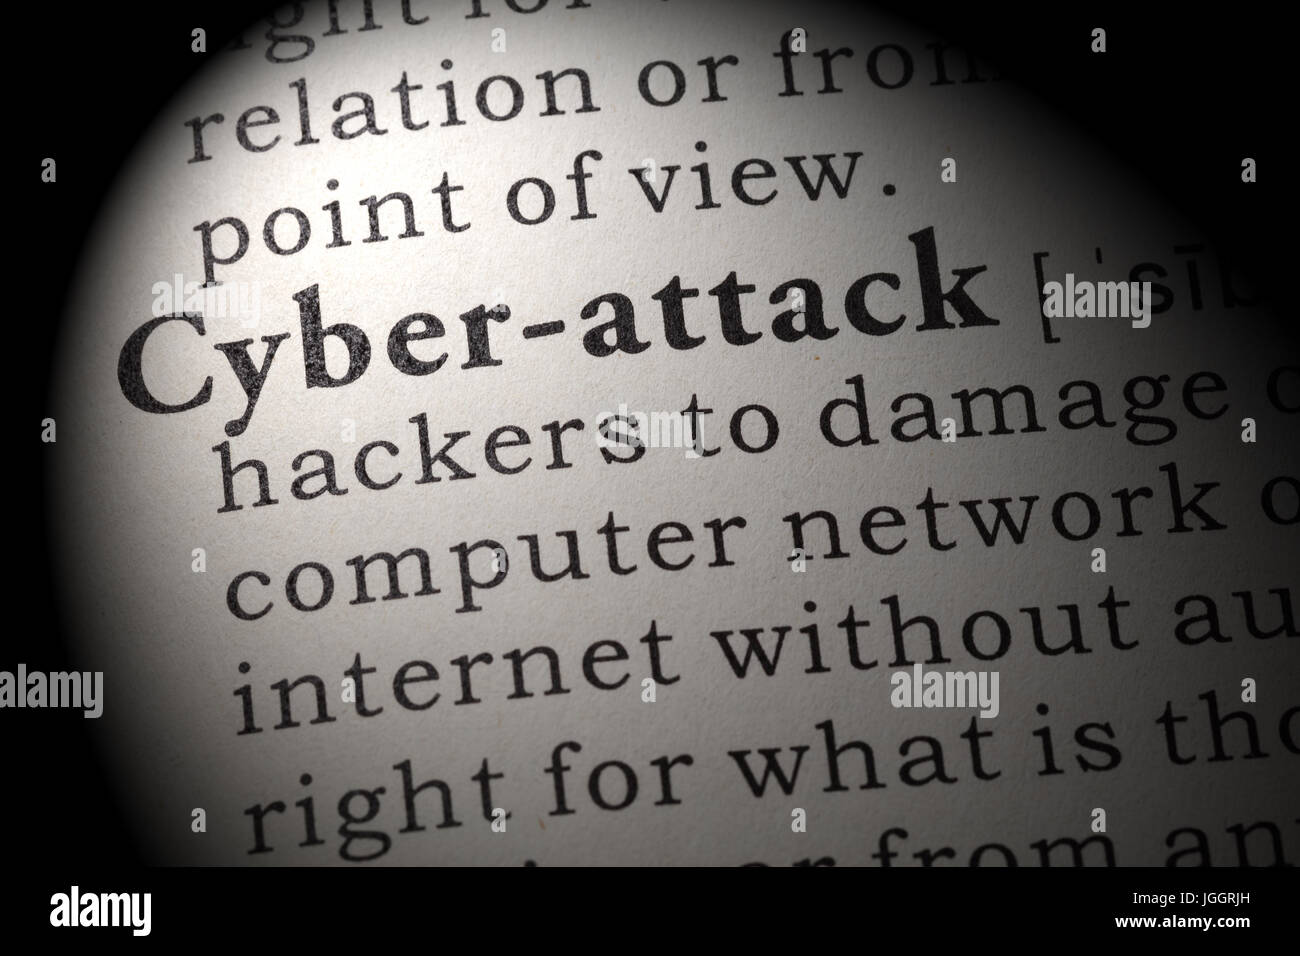 Fake Dictionary, Dictionary definition of the word cyber-attack. including key descriptive words. Stock Photo